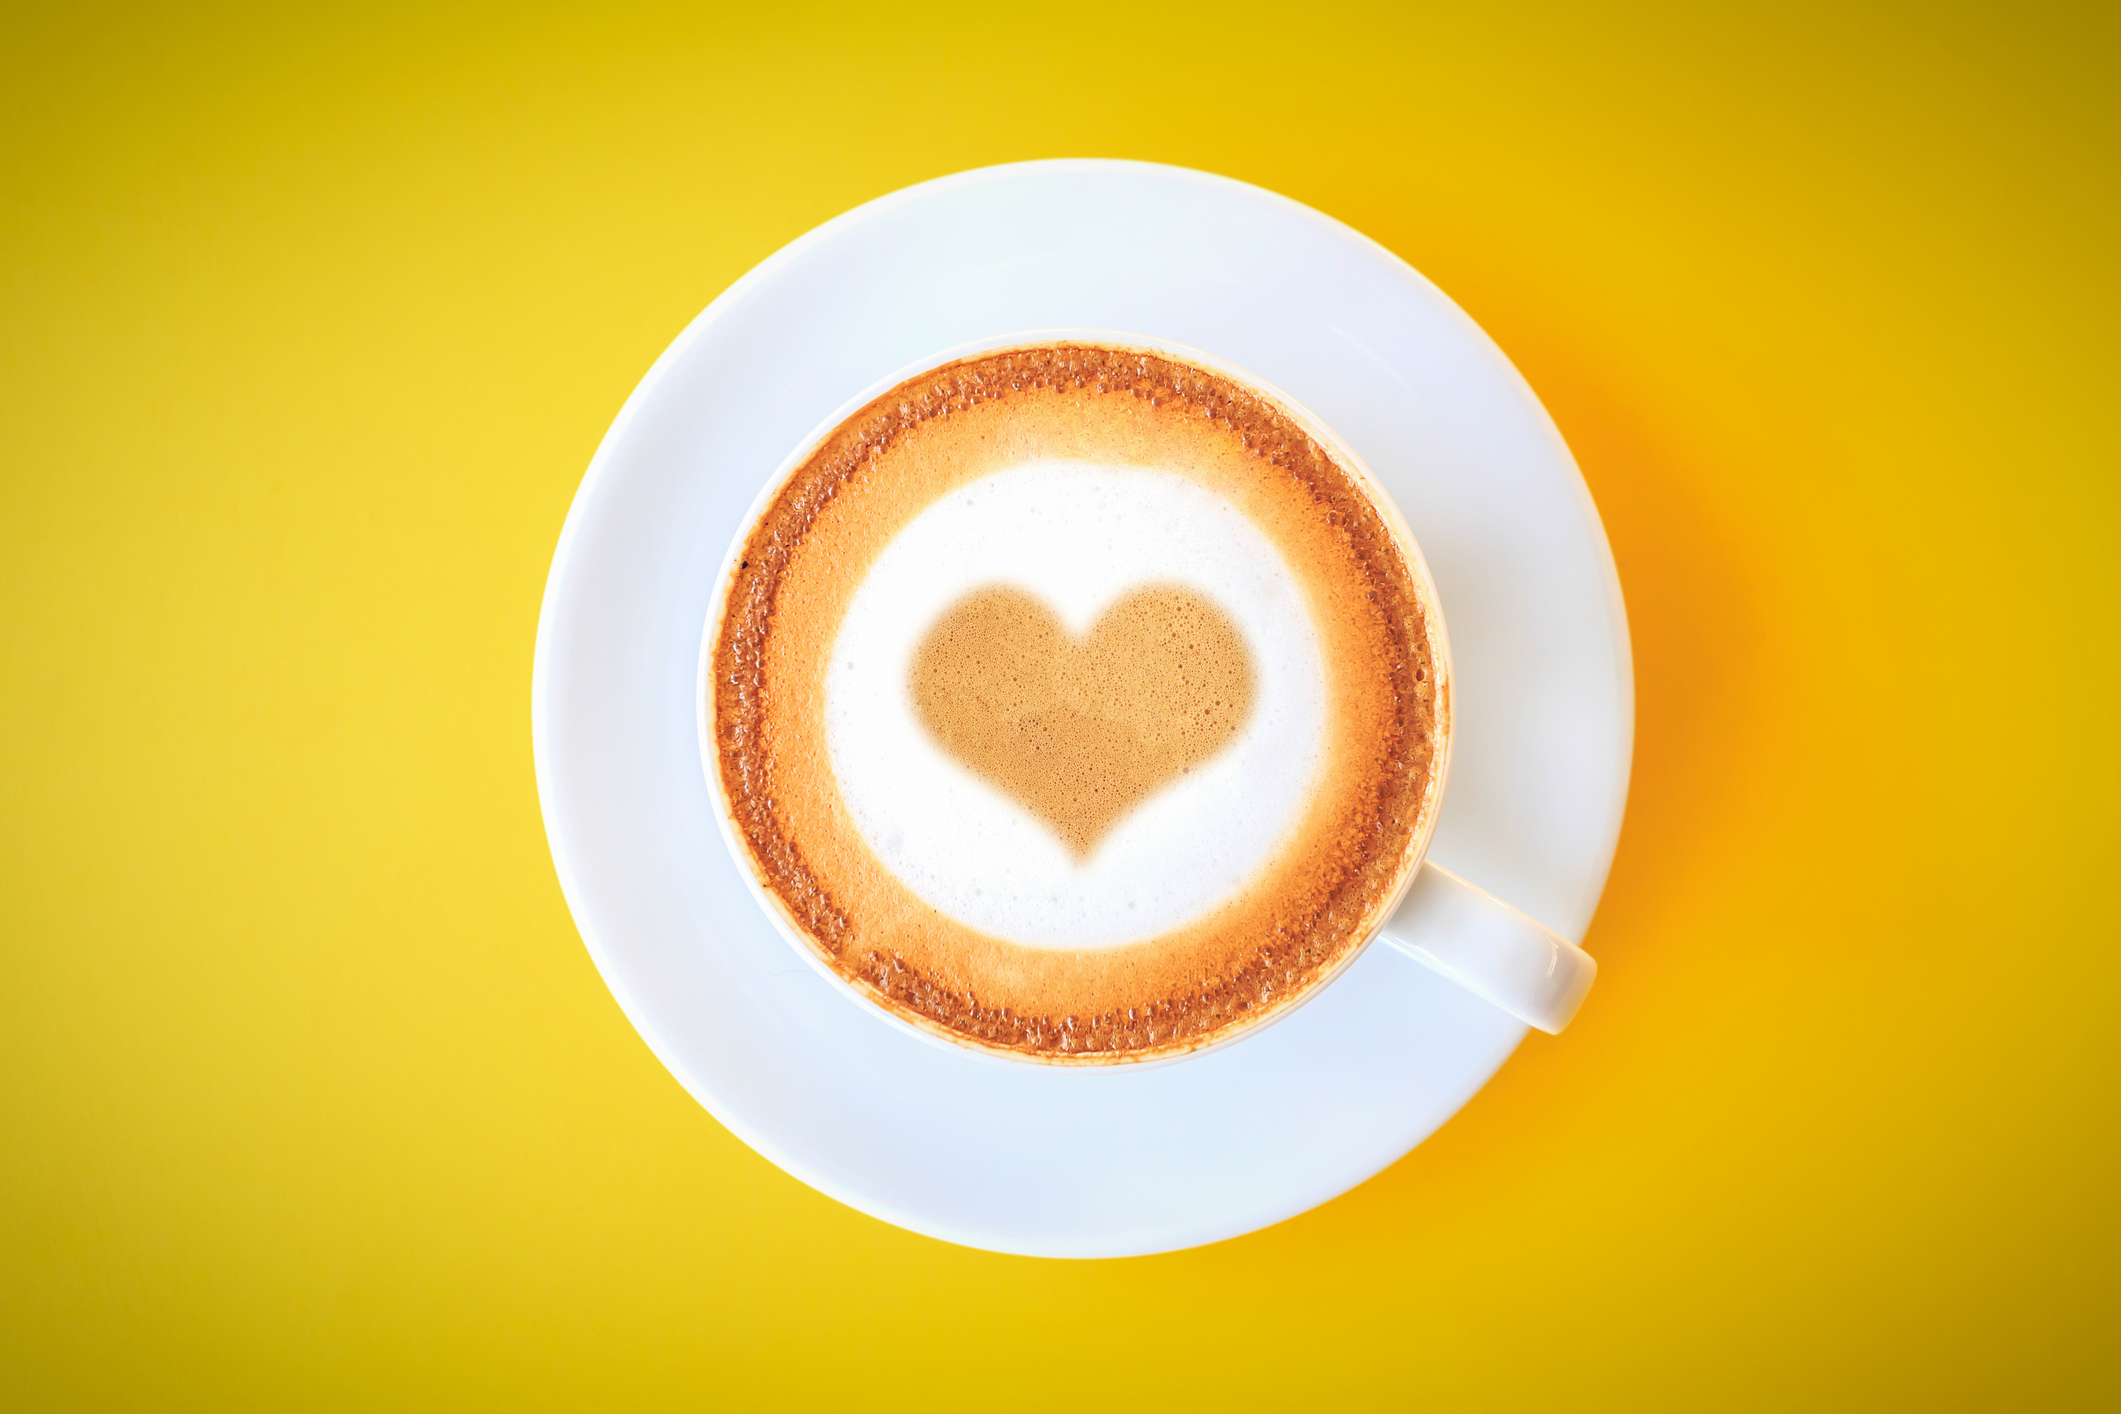 Coffee and heart health: The suggested daily limit